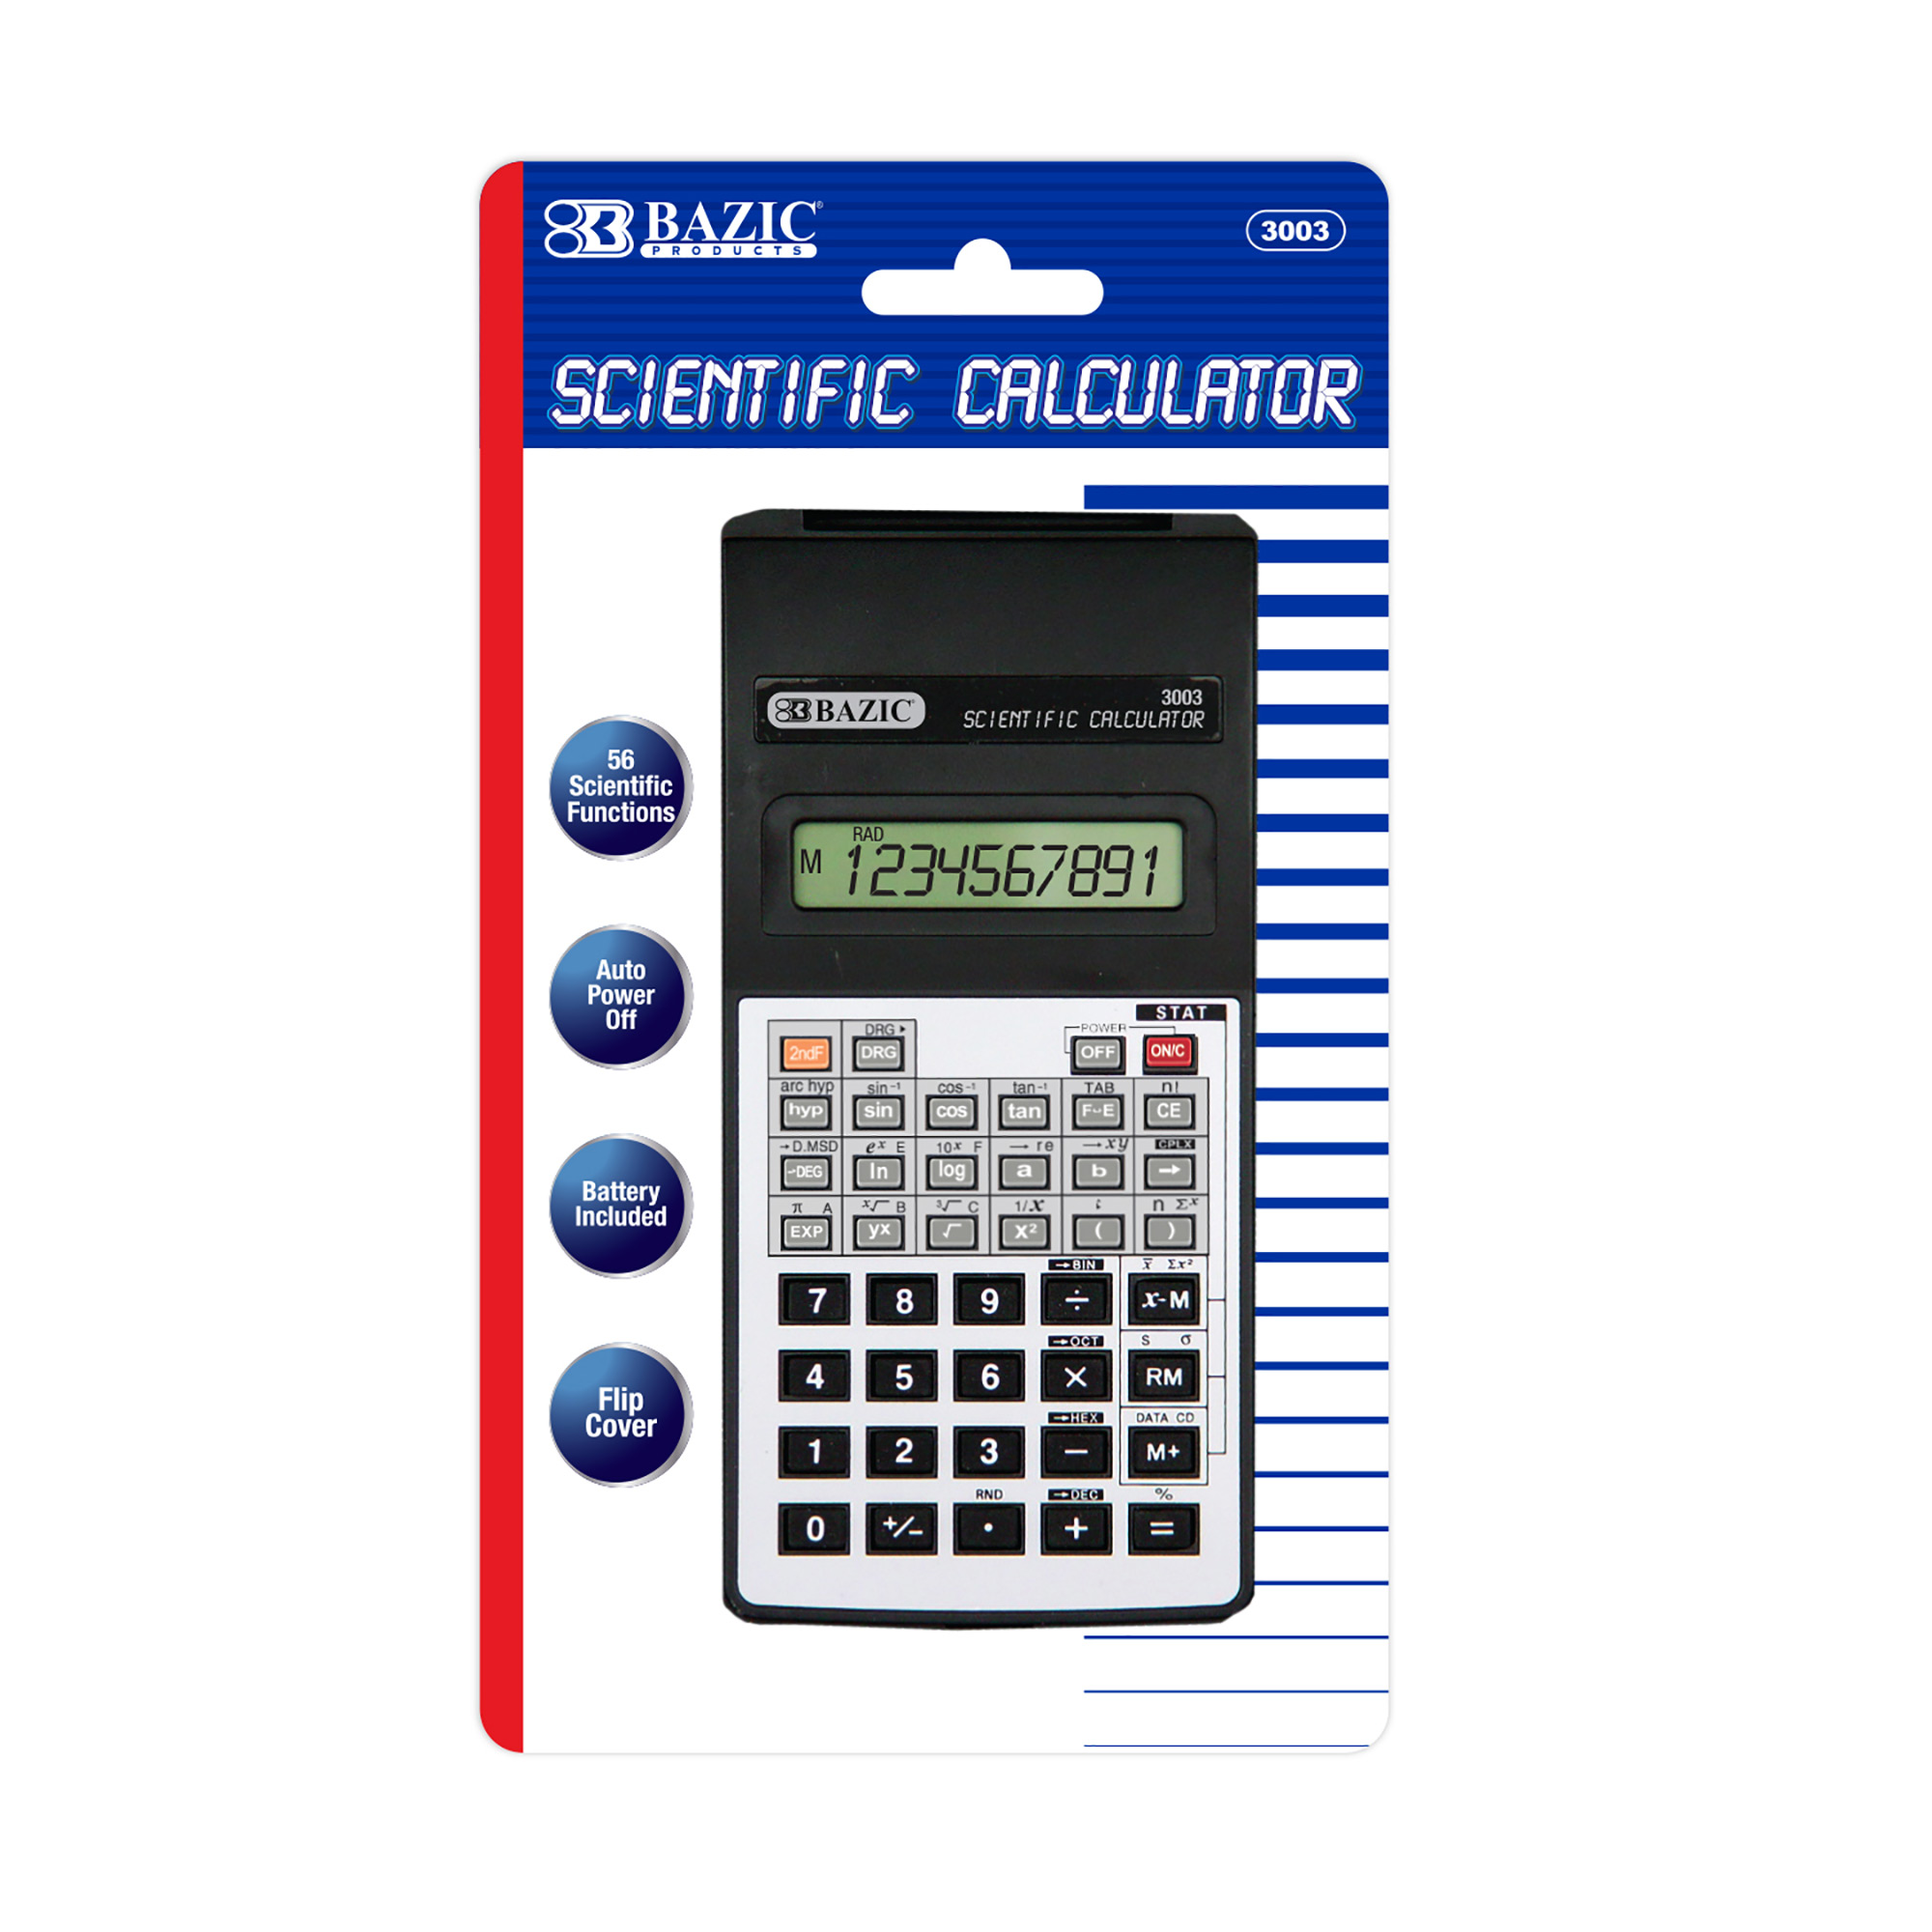 Algebraic LeWorld 10-Digit with 1 Year Warranty Against Any Problem and Trigonometric Functions. Statistical Silver, with Protective Cover 56 Function Scientific Calculator Geometric 